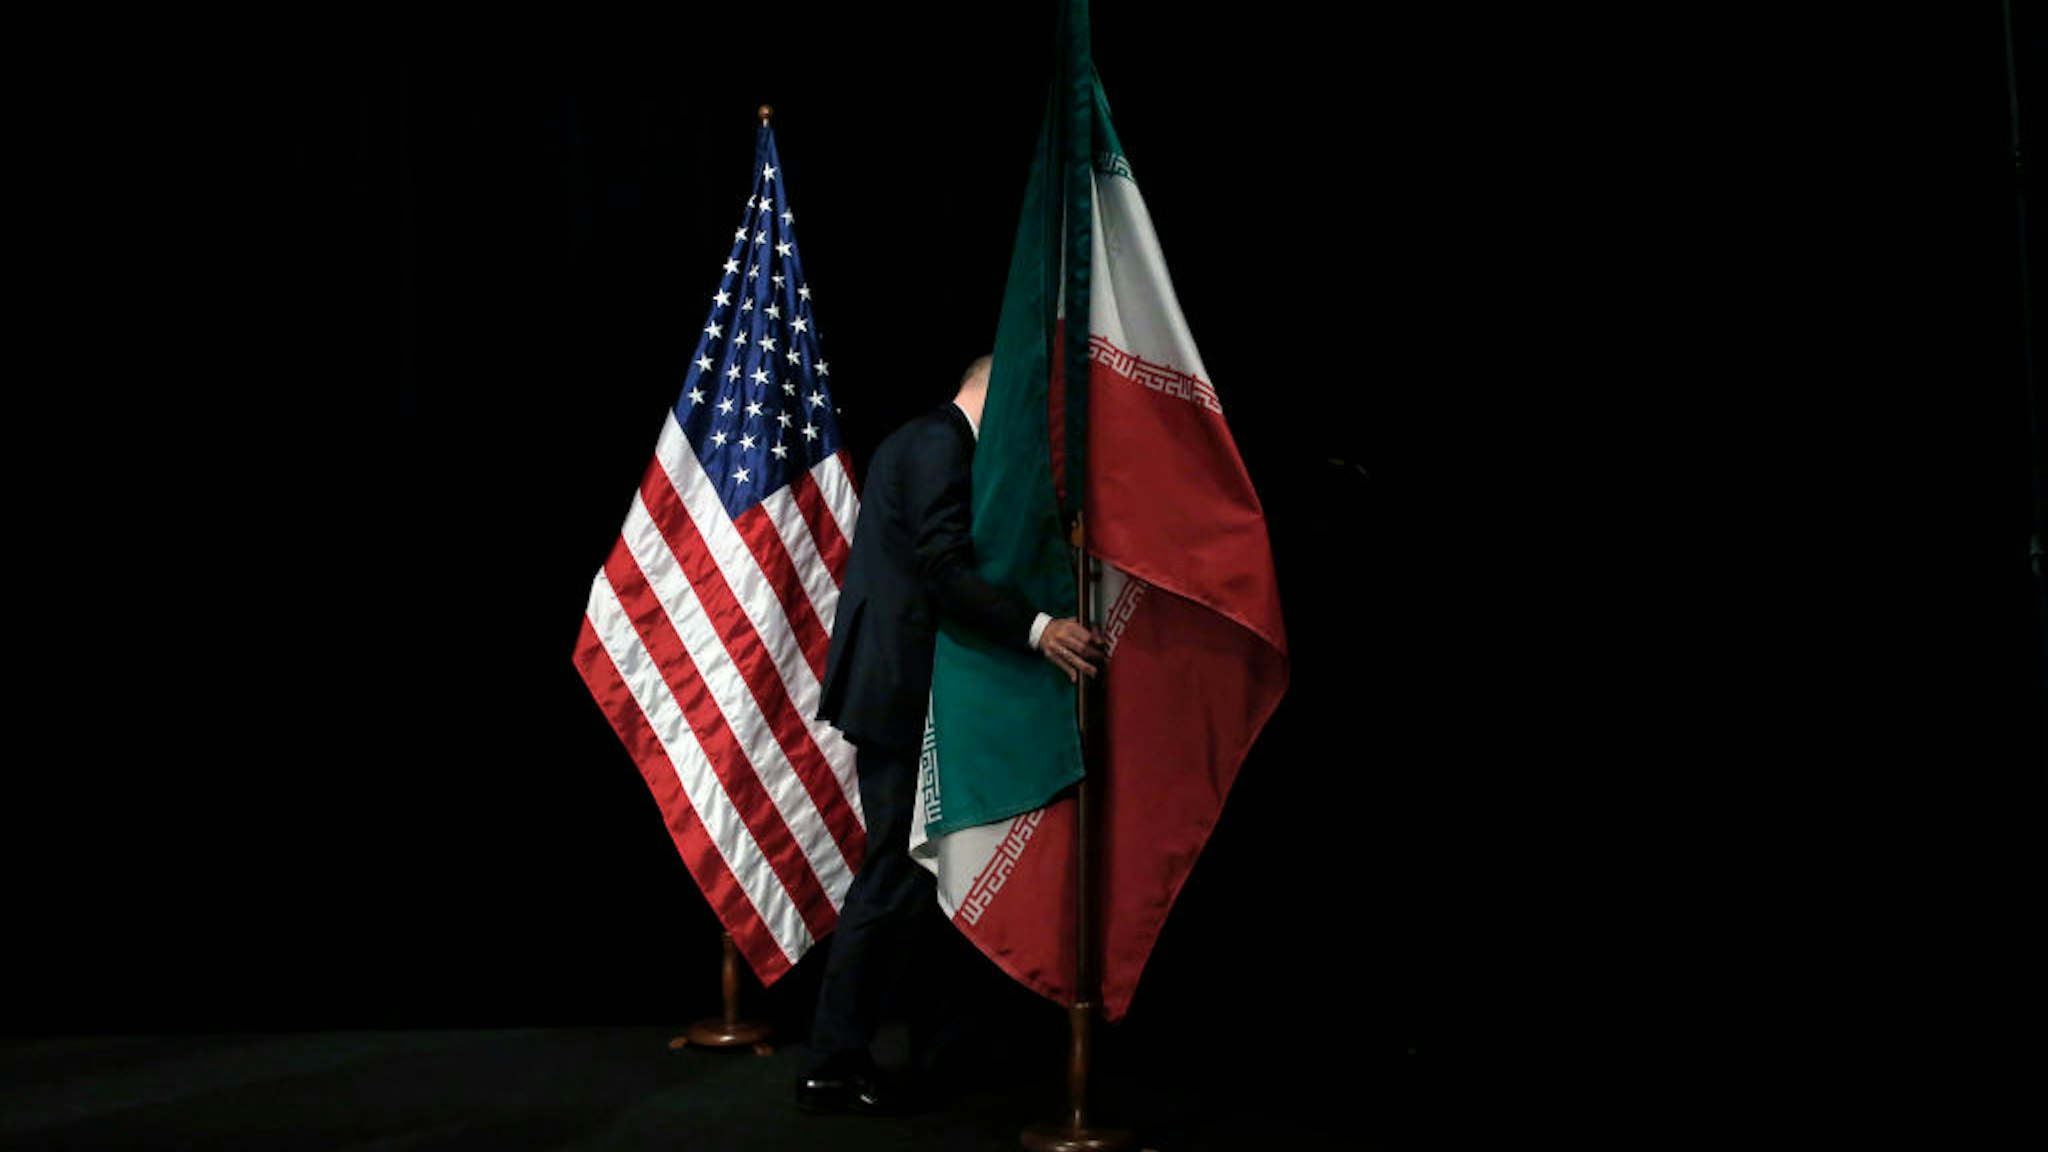 A staff removes the Iranian flag from the stage after a group picture with foreign ministers and representatives of Unites States, Iran, China, Russia, Britain, Germany, France and the European Union during the Iran nuclear talks at Austria International Centre in Vienna, Austria on July 14, 2015. Major powers clinched a historic deal aimed at ensuring Iran does not obtain the nuclear bomb, opening up Tehran's stricken economy and potentially ending decades of bad blood with the West.